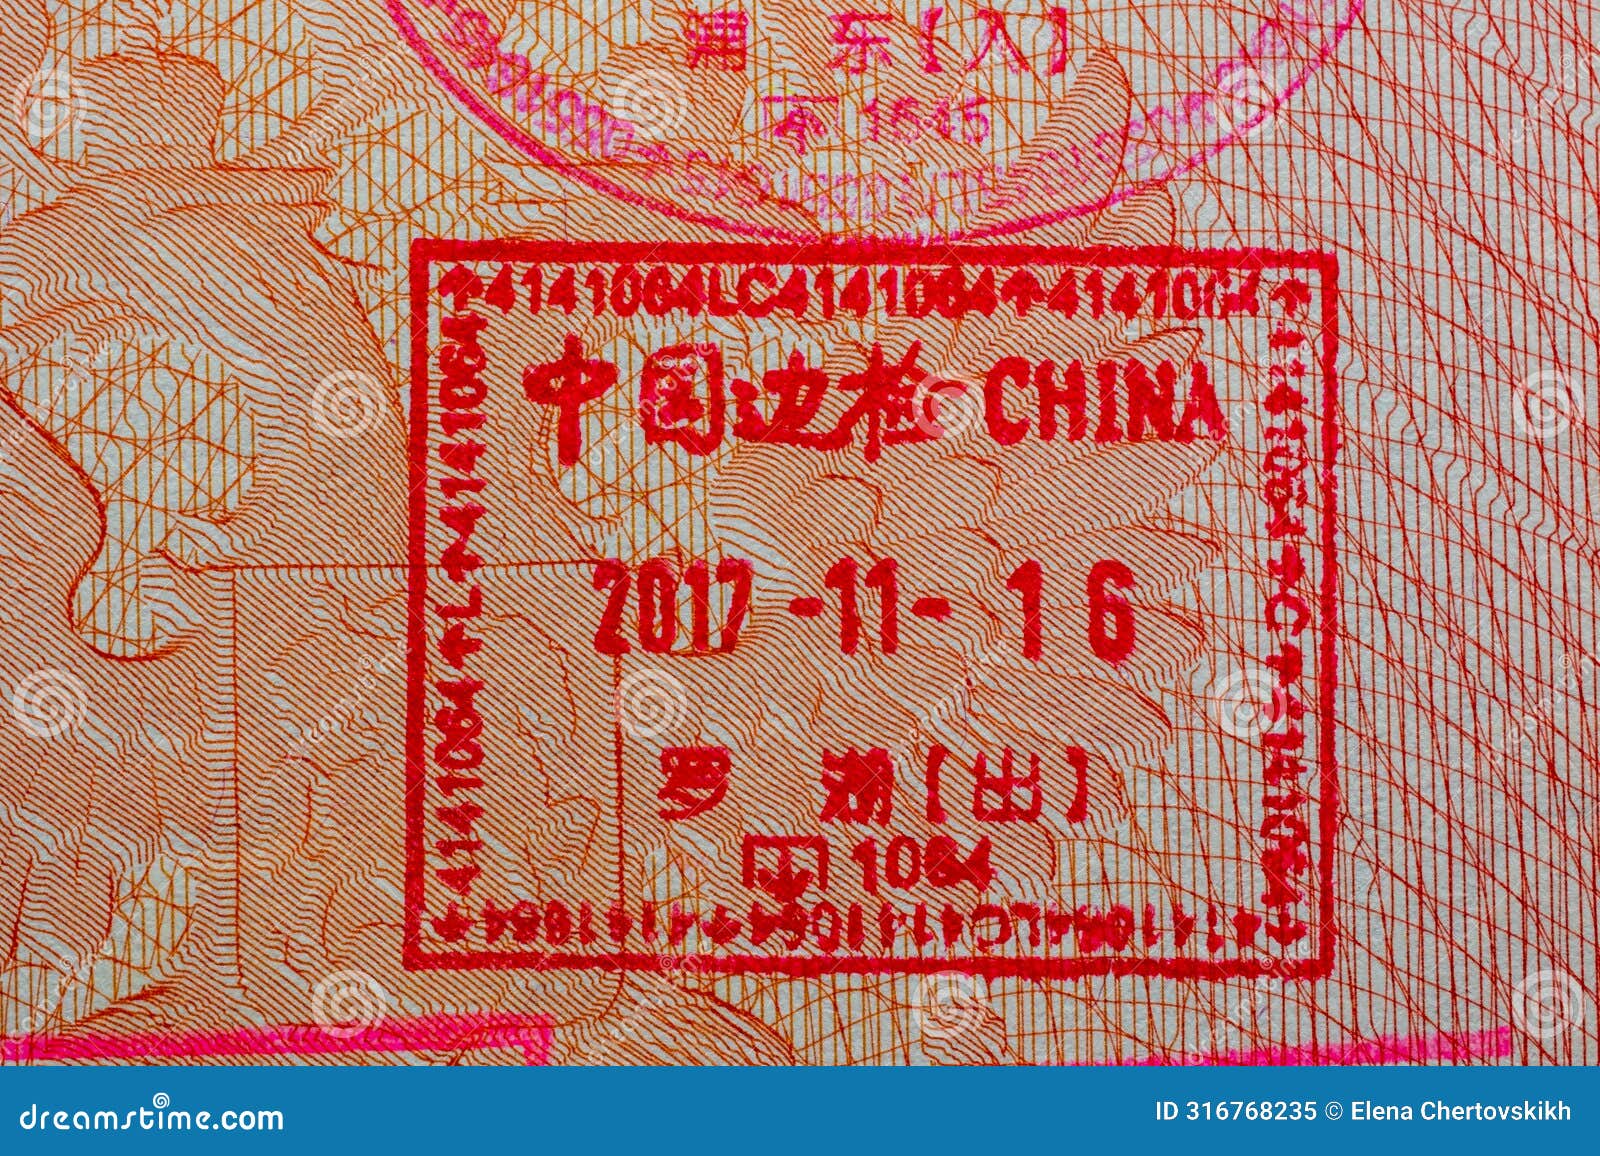 chinese stamp in a travel passport, entry and exit stamp, china emigration, immigration